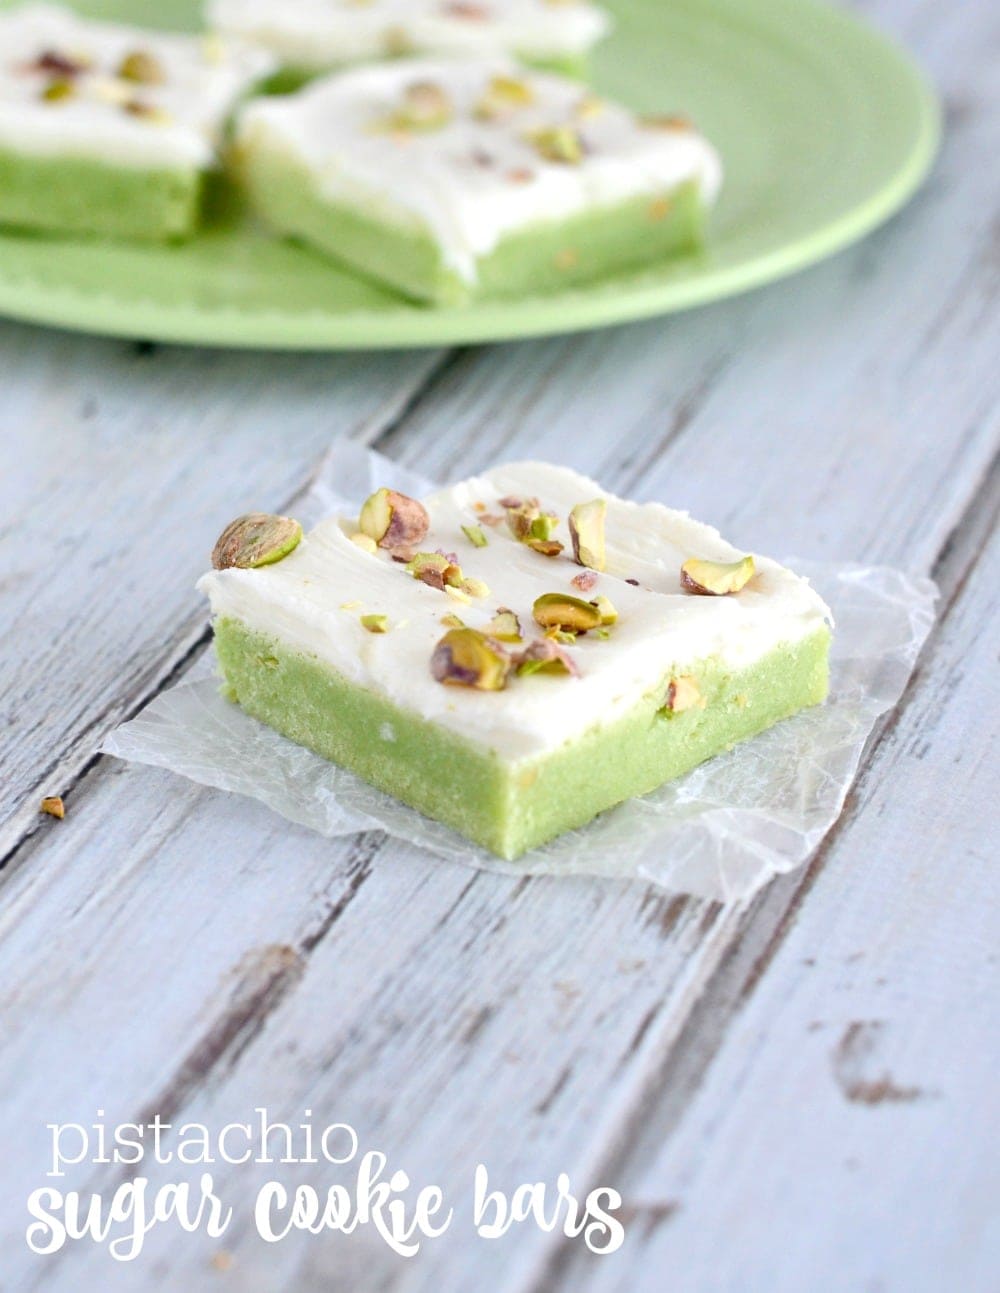 Soft and chewy Pistachio Sugar Cookie Bars with cream cheese frosting. An easy treat that everyone will love!